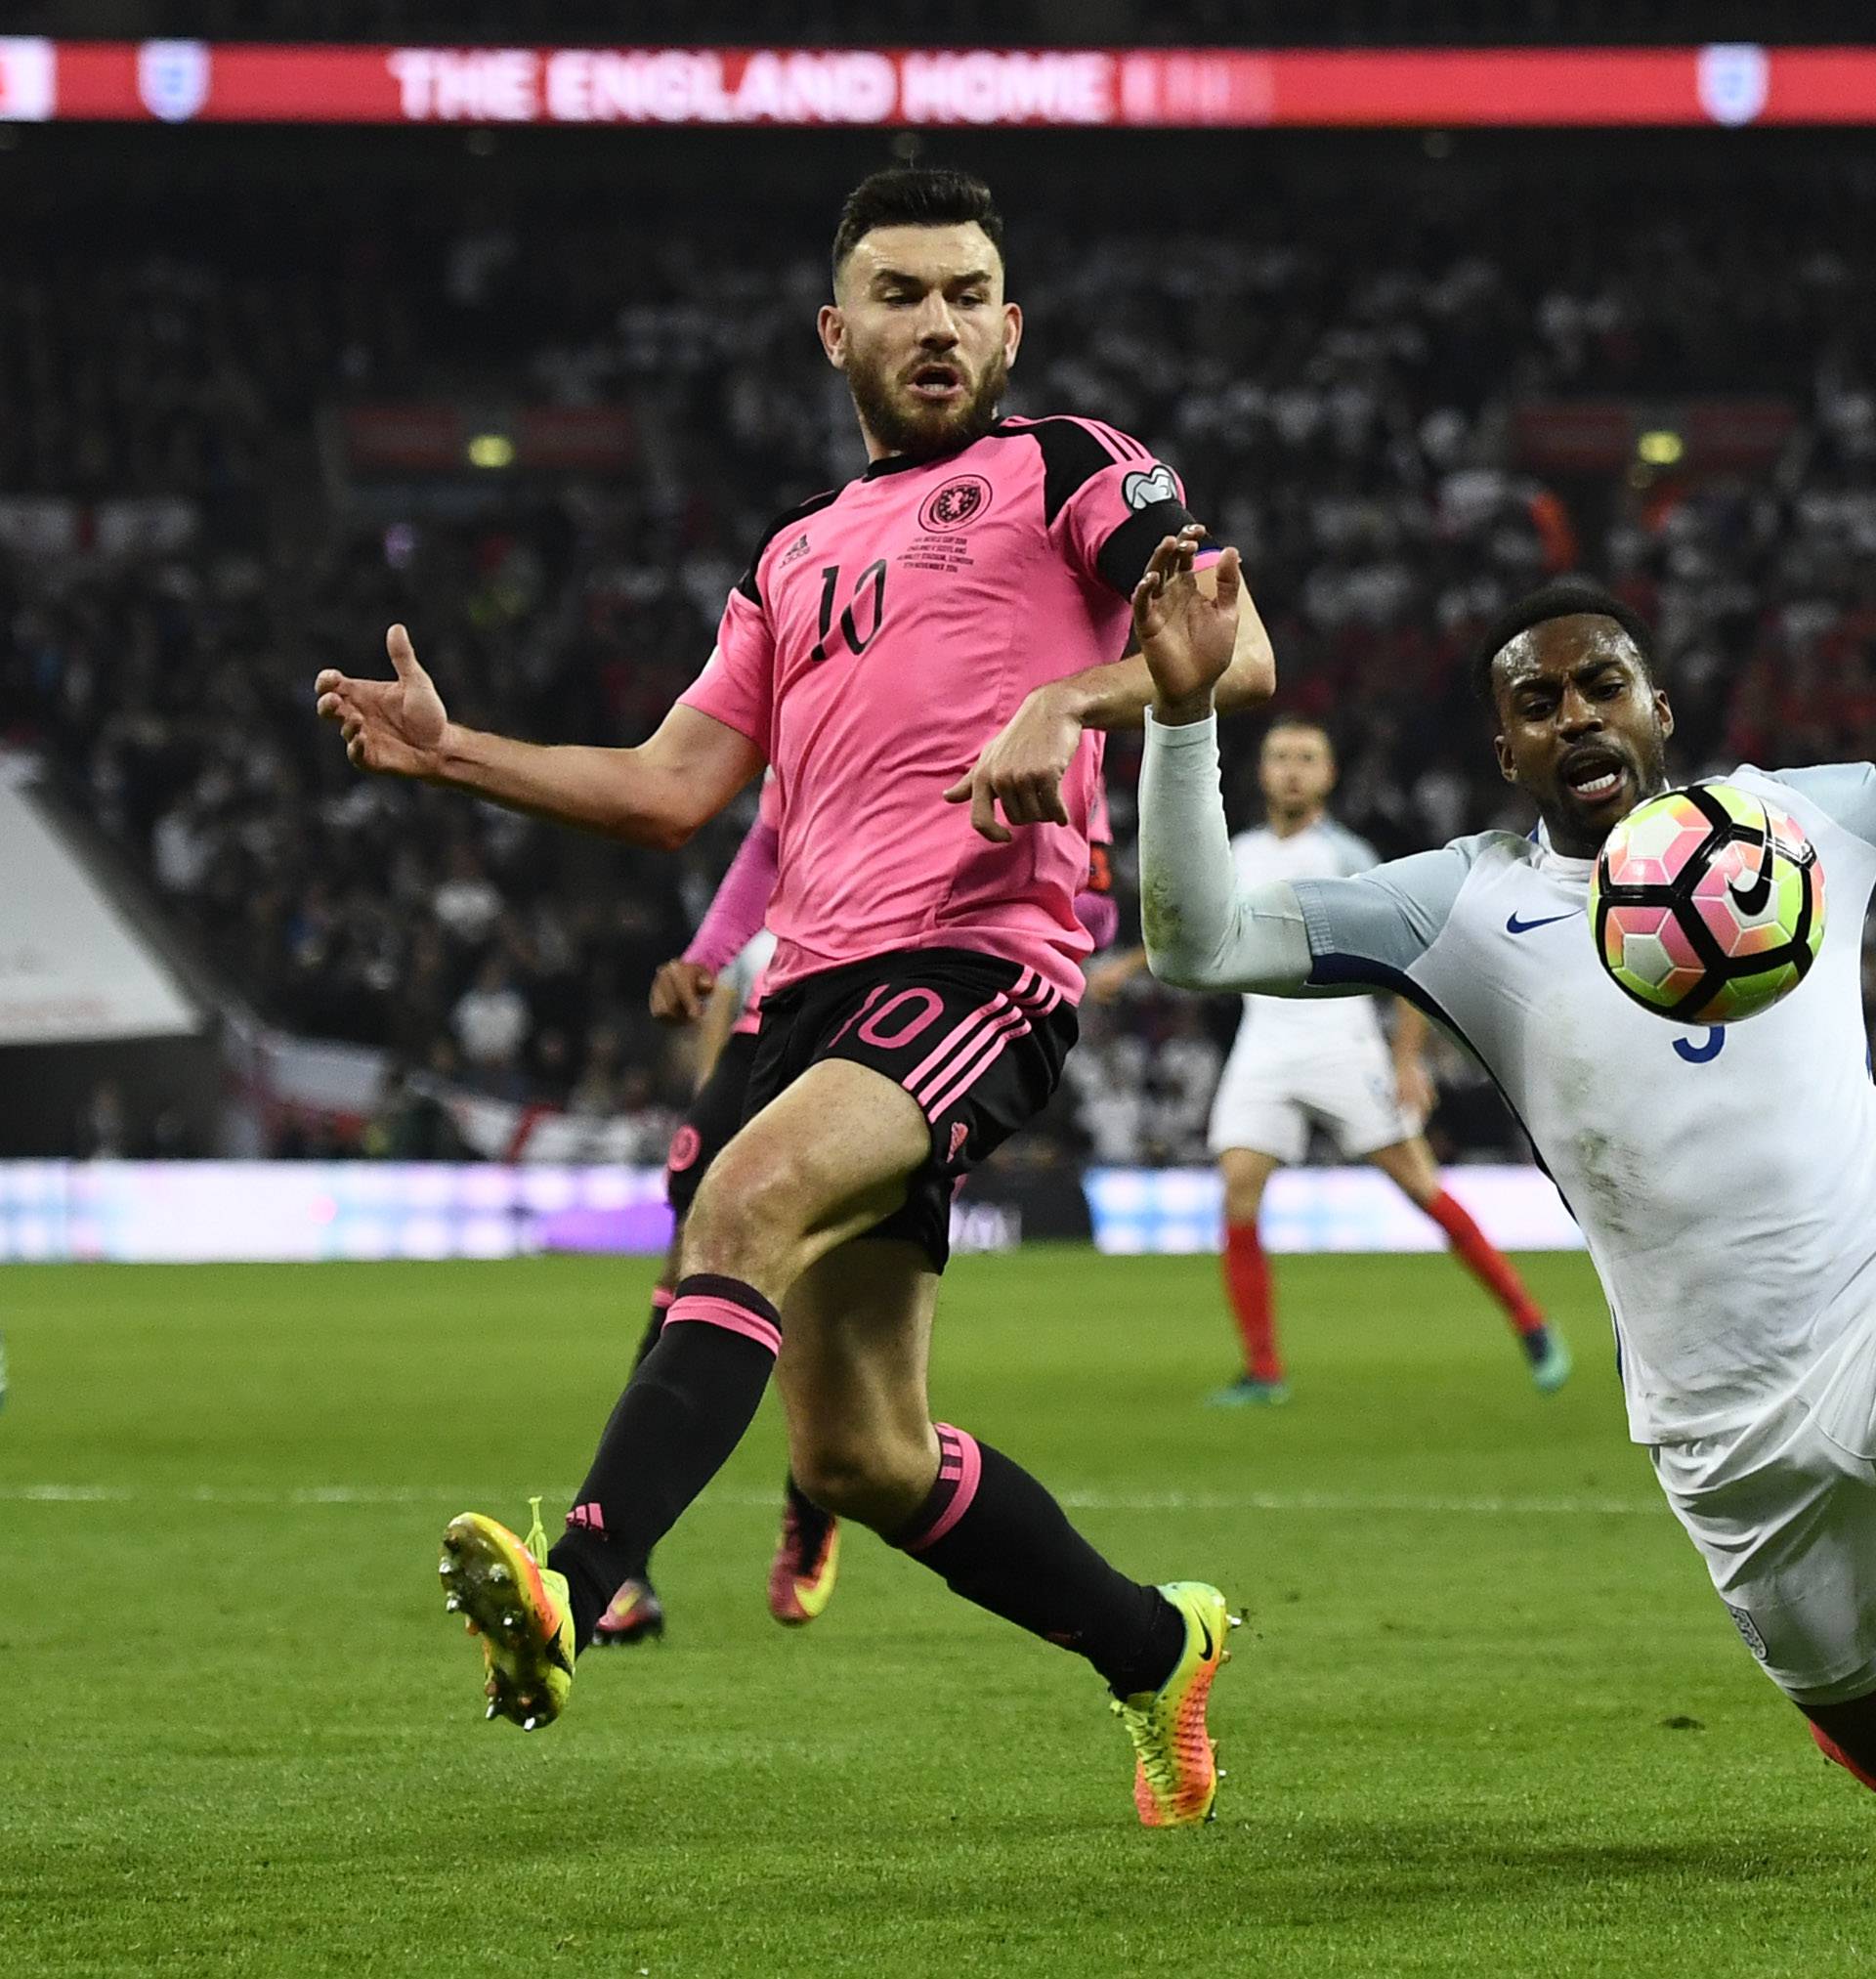 England's Danny Rose goes down in the box under a challenge from Scotland's Robert Snodgrass